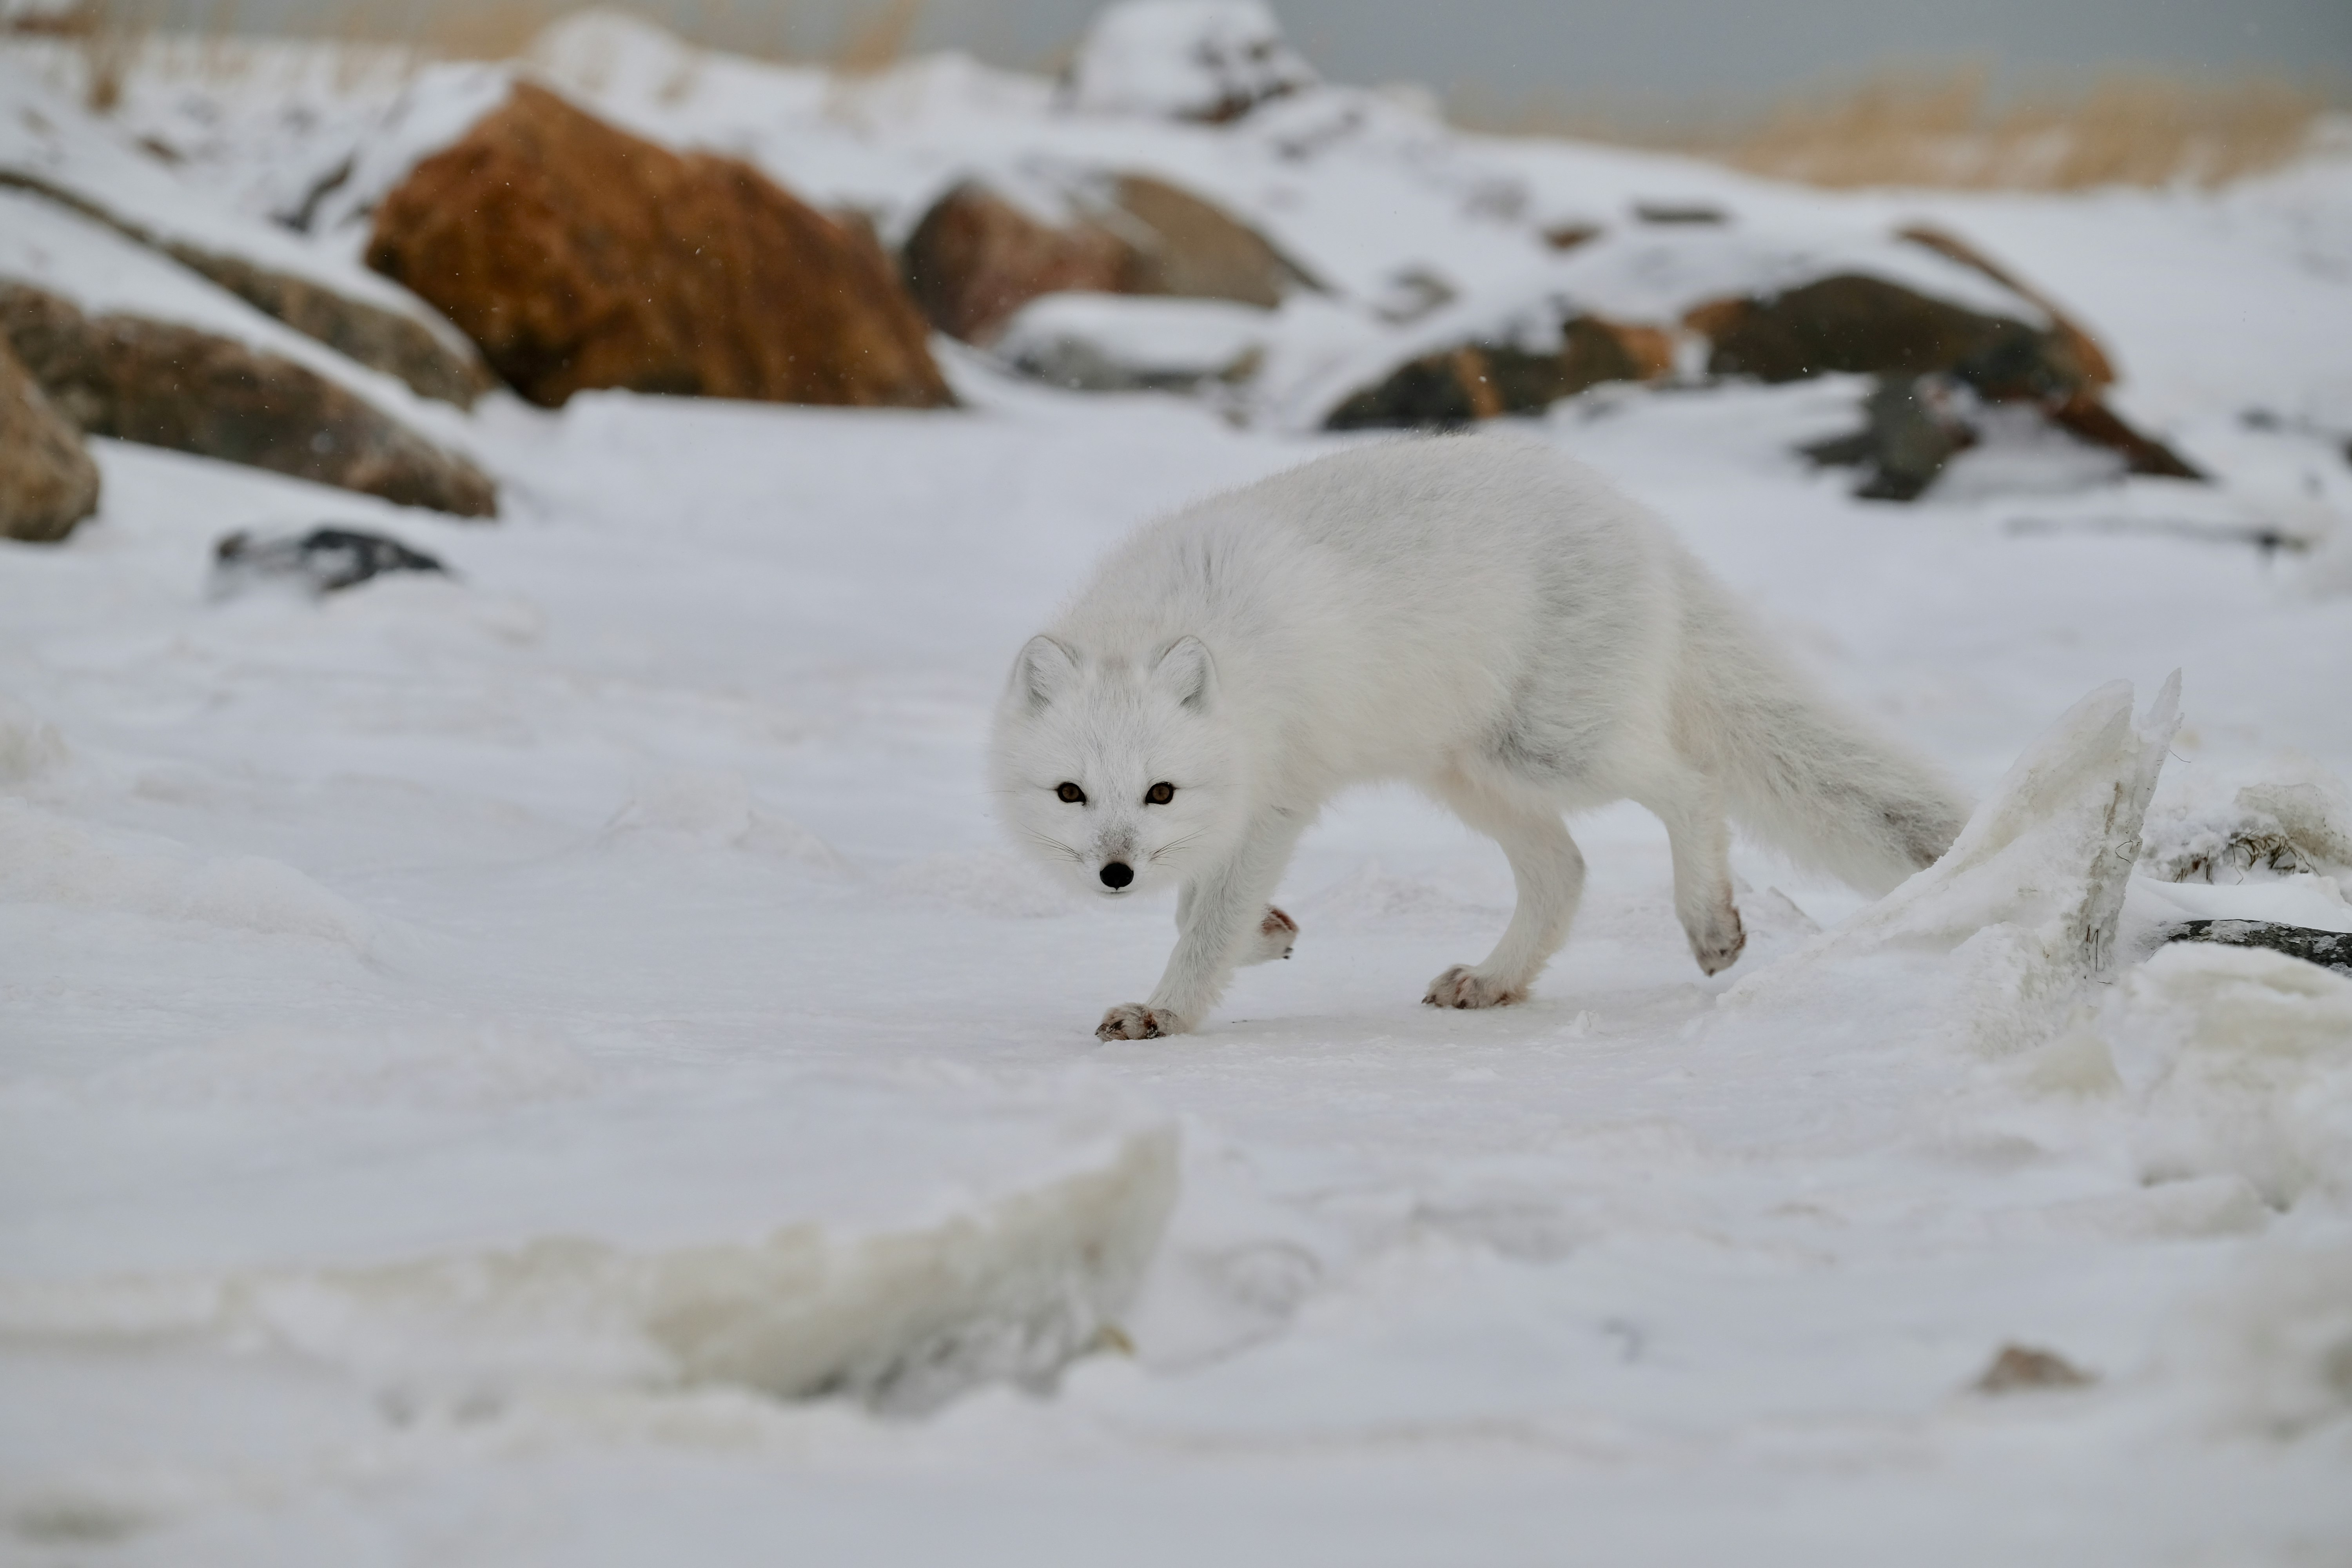 A white, fluffy Arctic fox arches its back and appears to stare towards the camera as it prowls across the icy ground